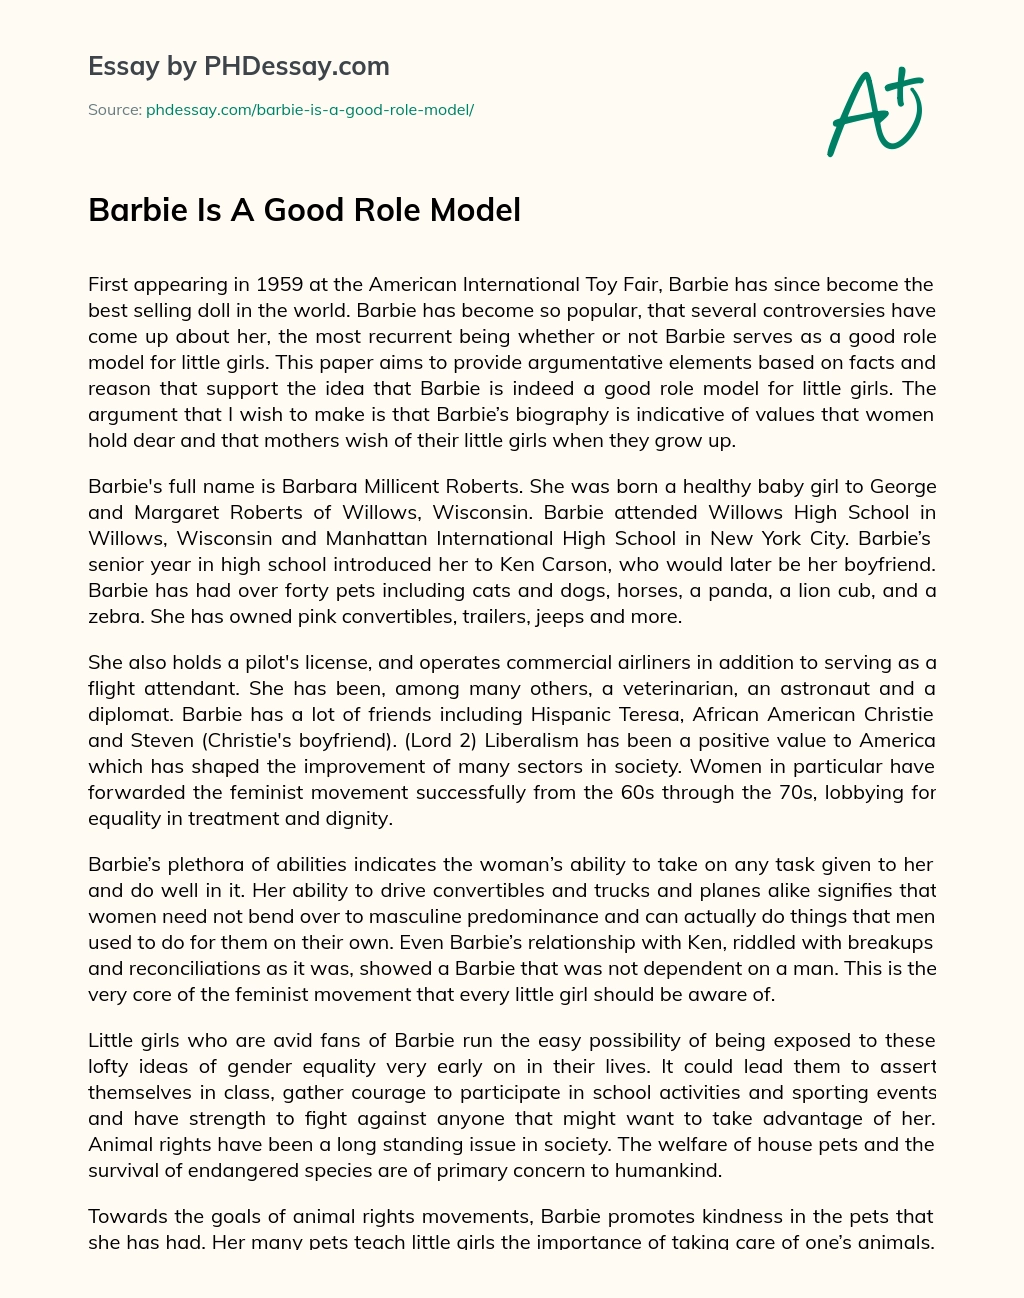 Barbie Is A Good Role Model essay